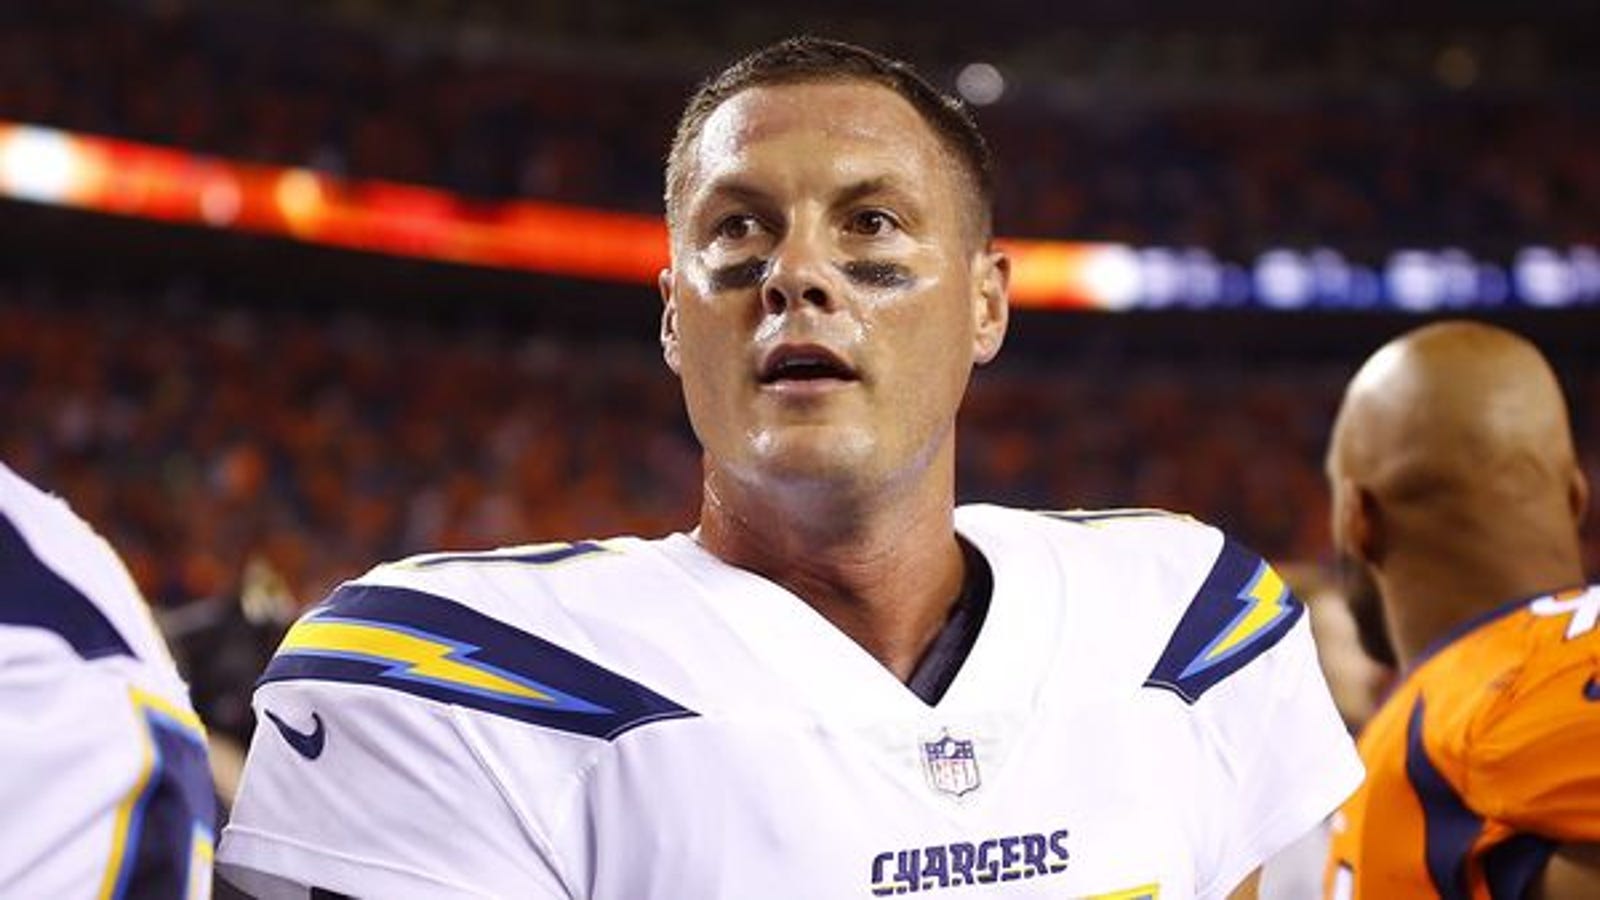 How Many Children Does Philip Rivers Have Left In Him?